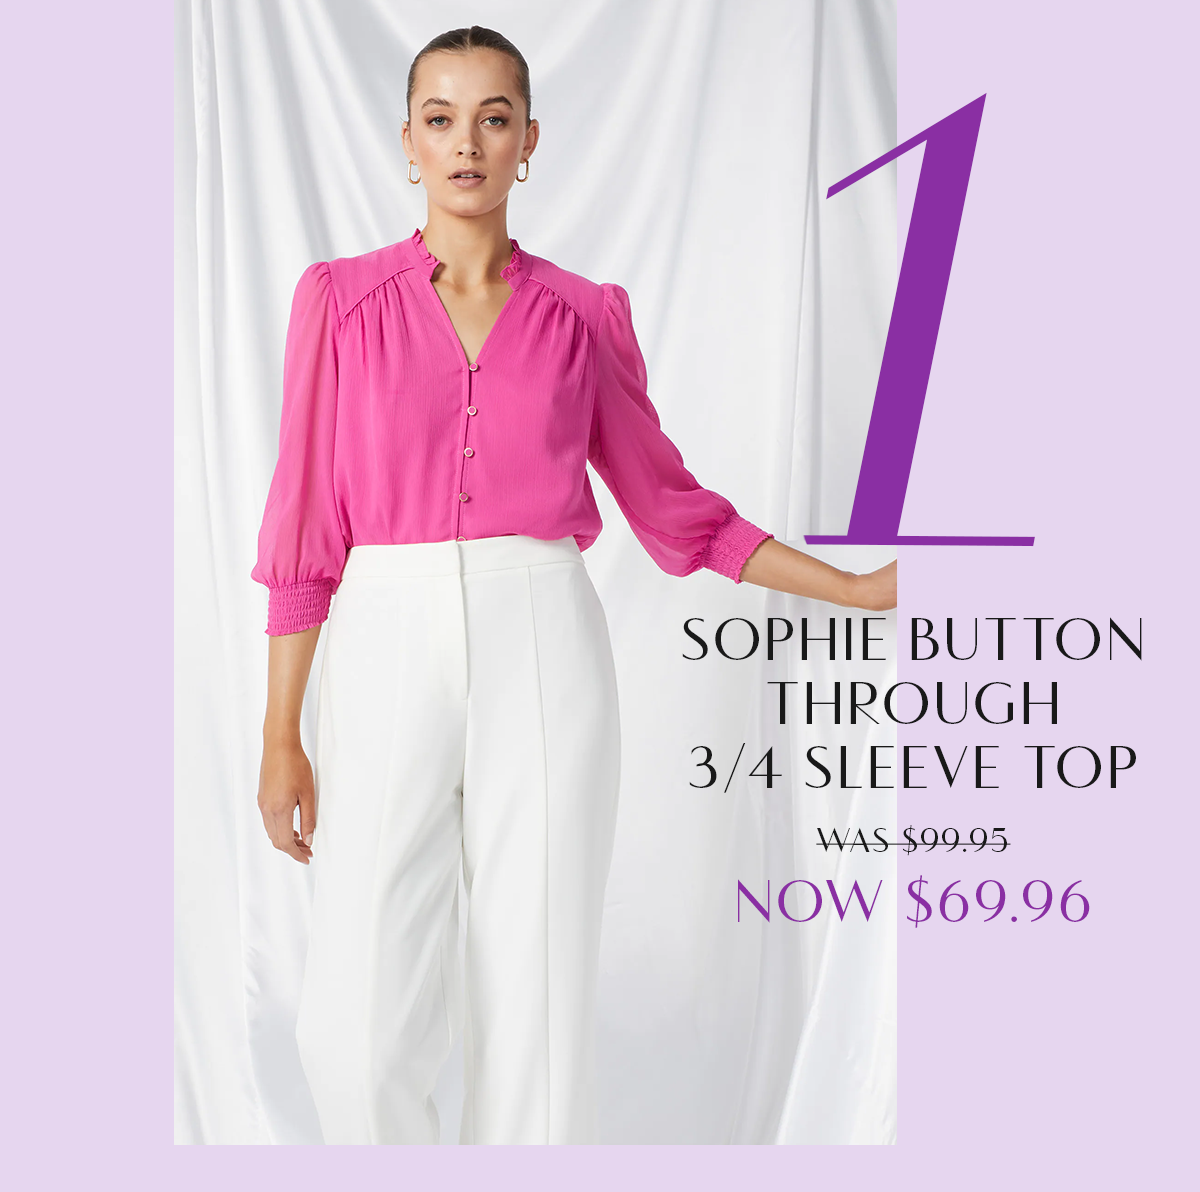 1 Sophie Button Through 3/4 Sleeve Top was $99.95 Now $69.96